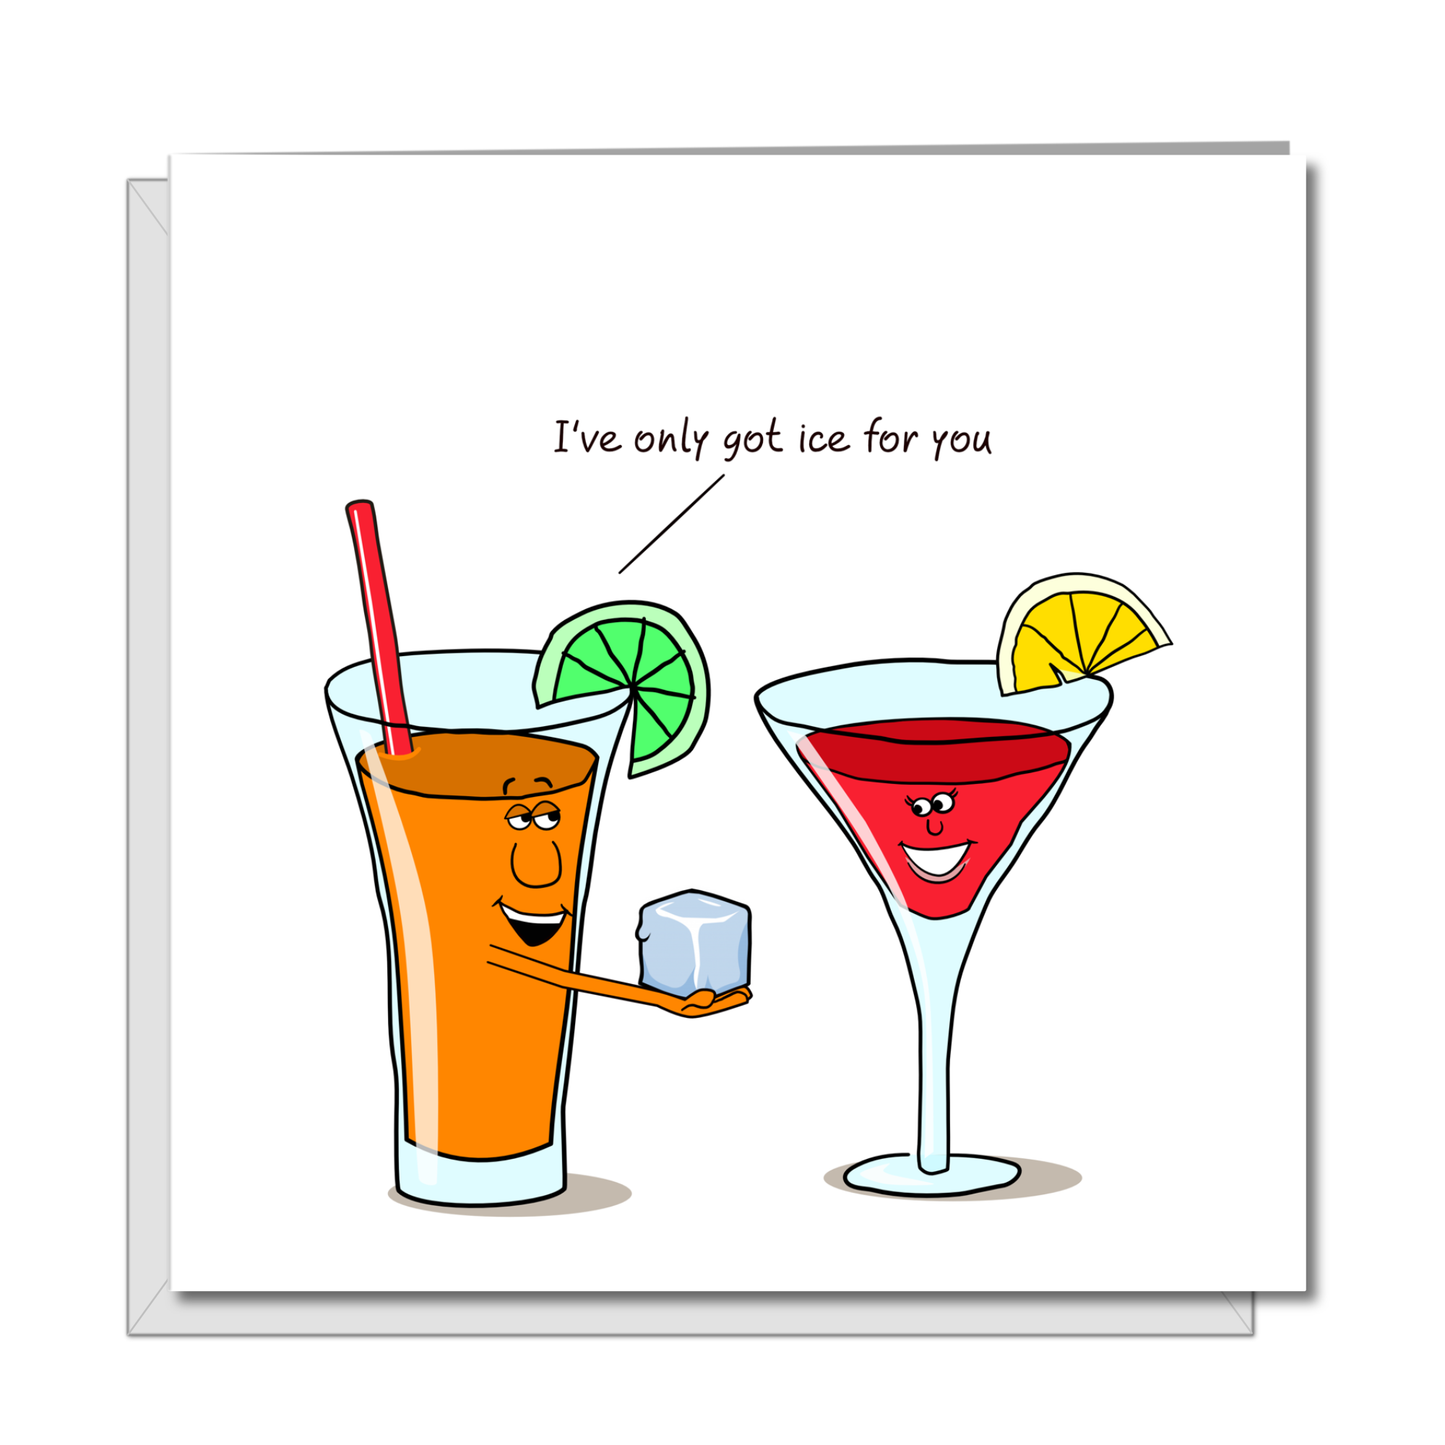 Funny Card for Wife, Girlfriend, Fiance - Only Ice for You